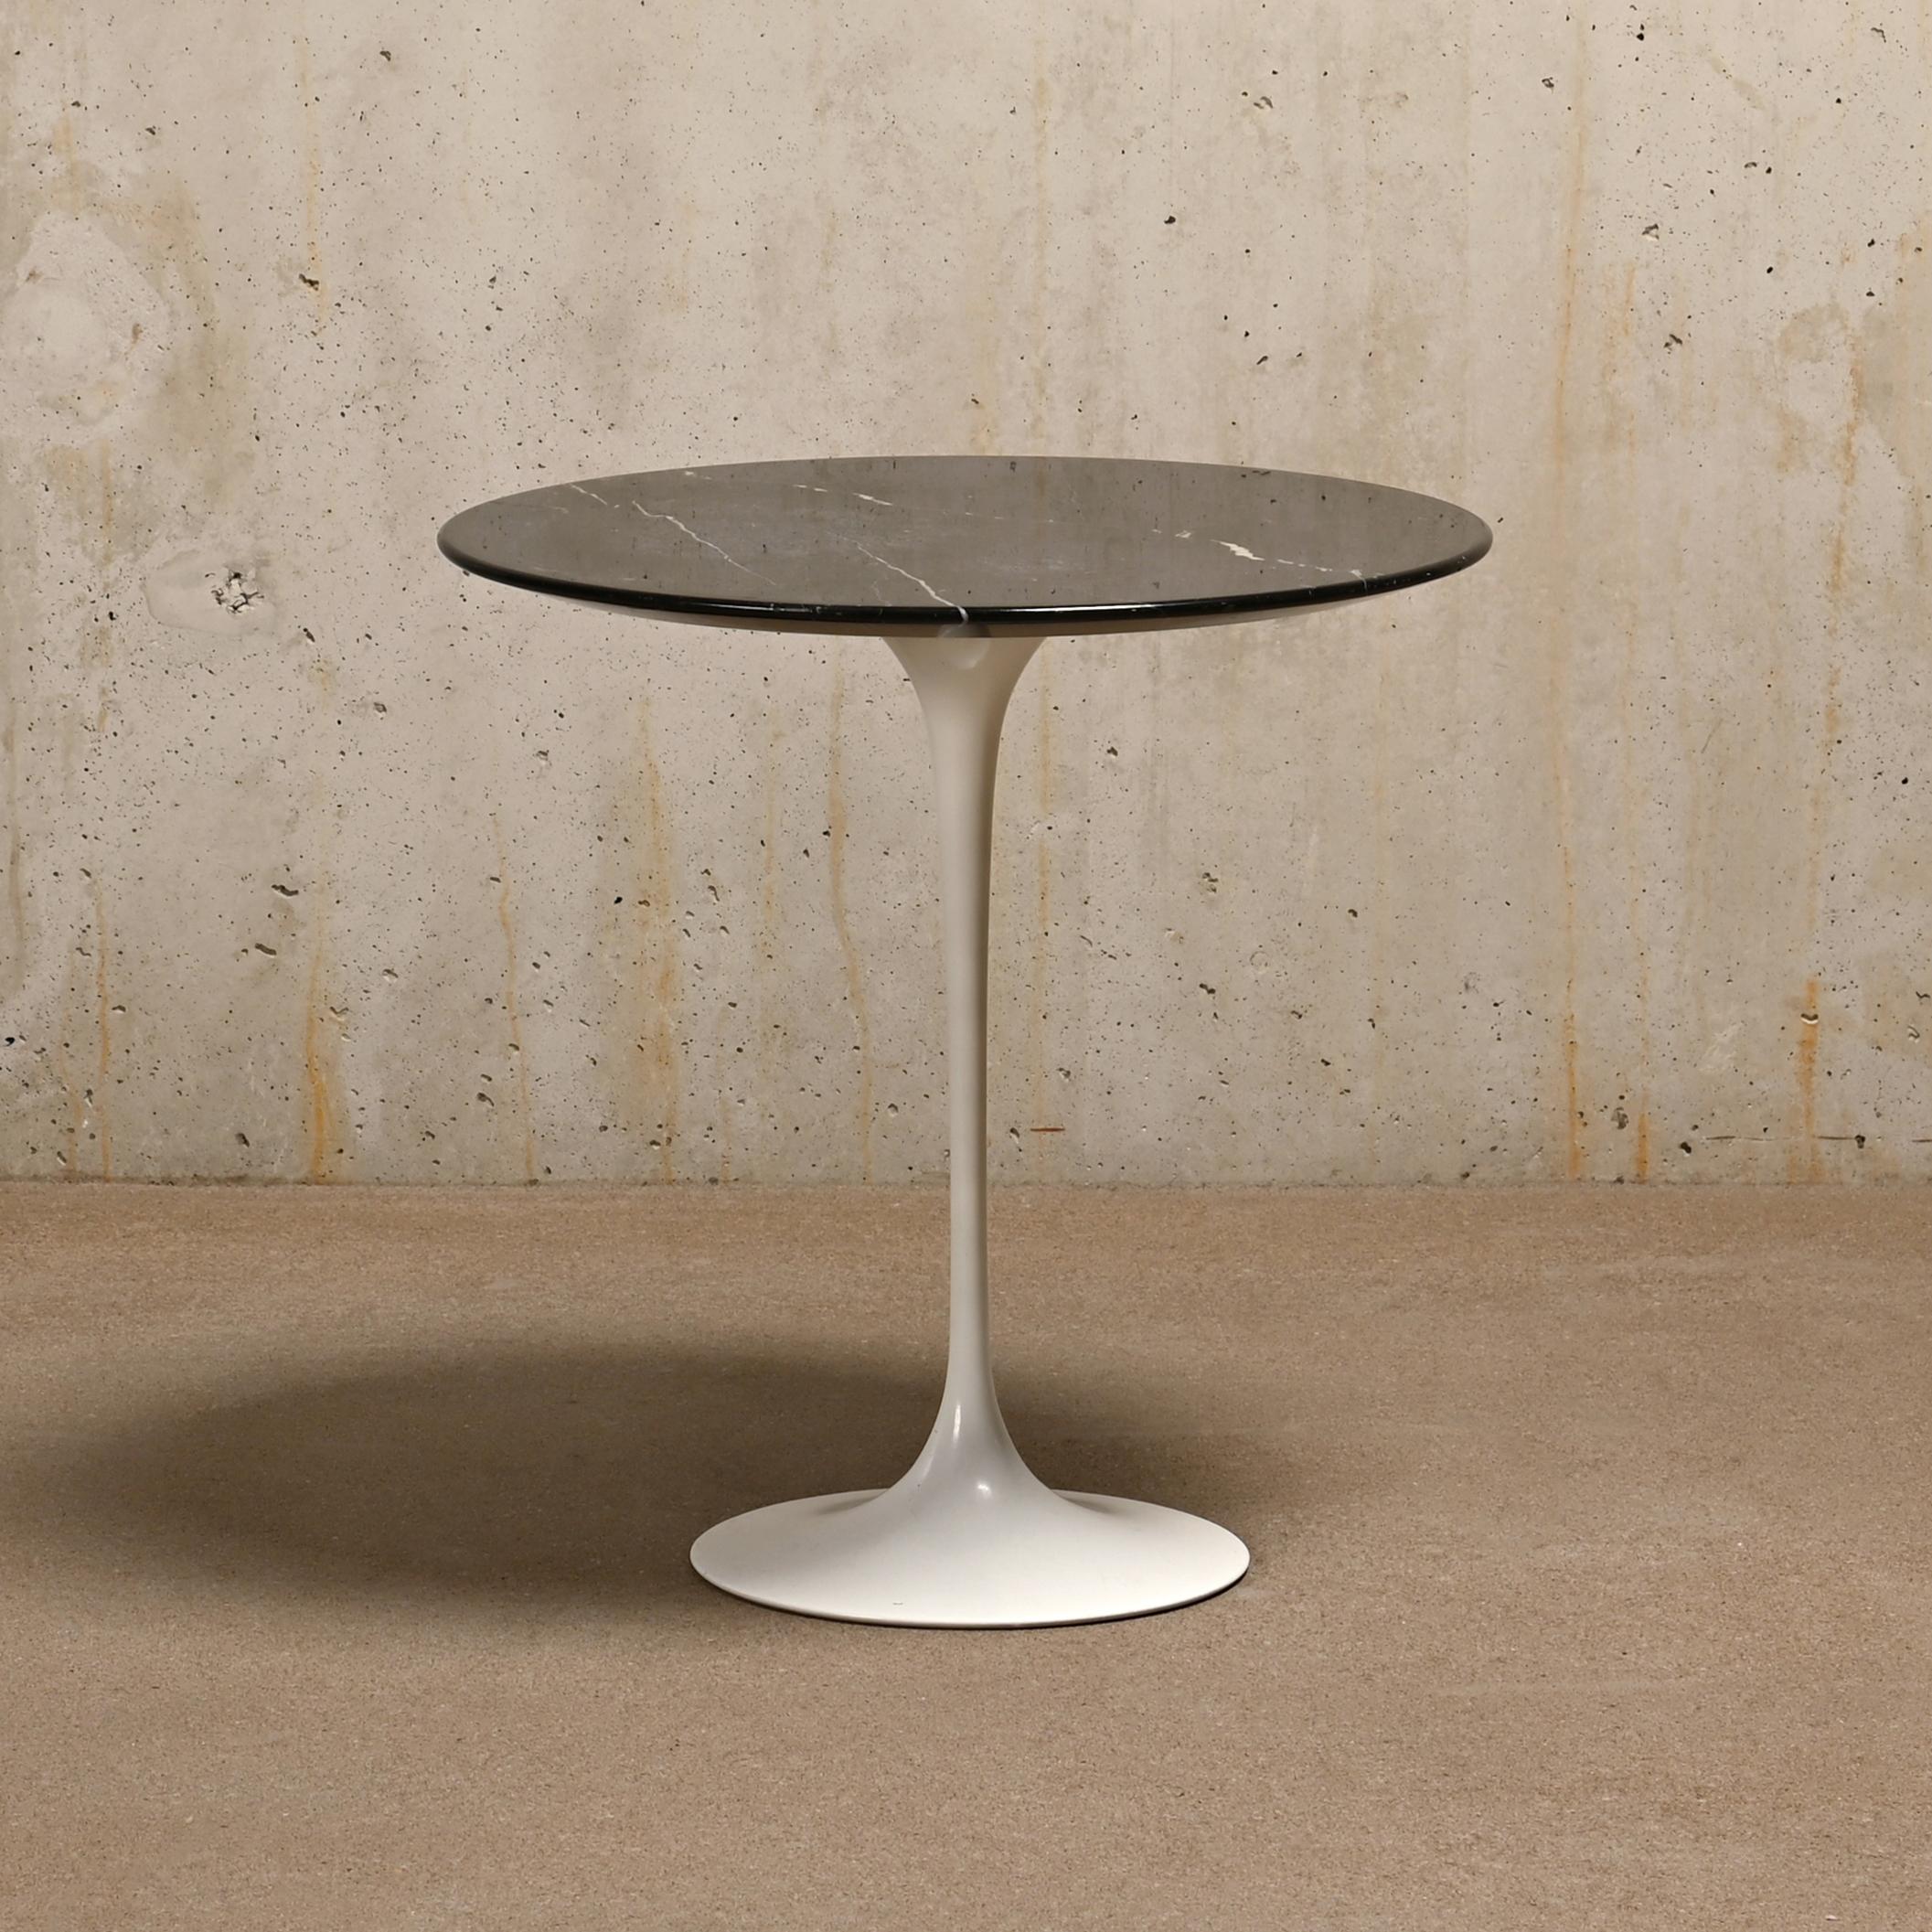 Simple and elegant pedestal side table desgined by Eero Saarinen in 1956 for Knoll. Thin marble table top with tapered edges. The marble has beautiful drawing in neutral beige, gray and black tones. The edge and top is in very good condition with no